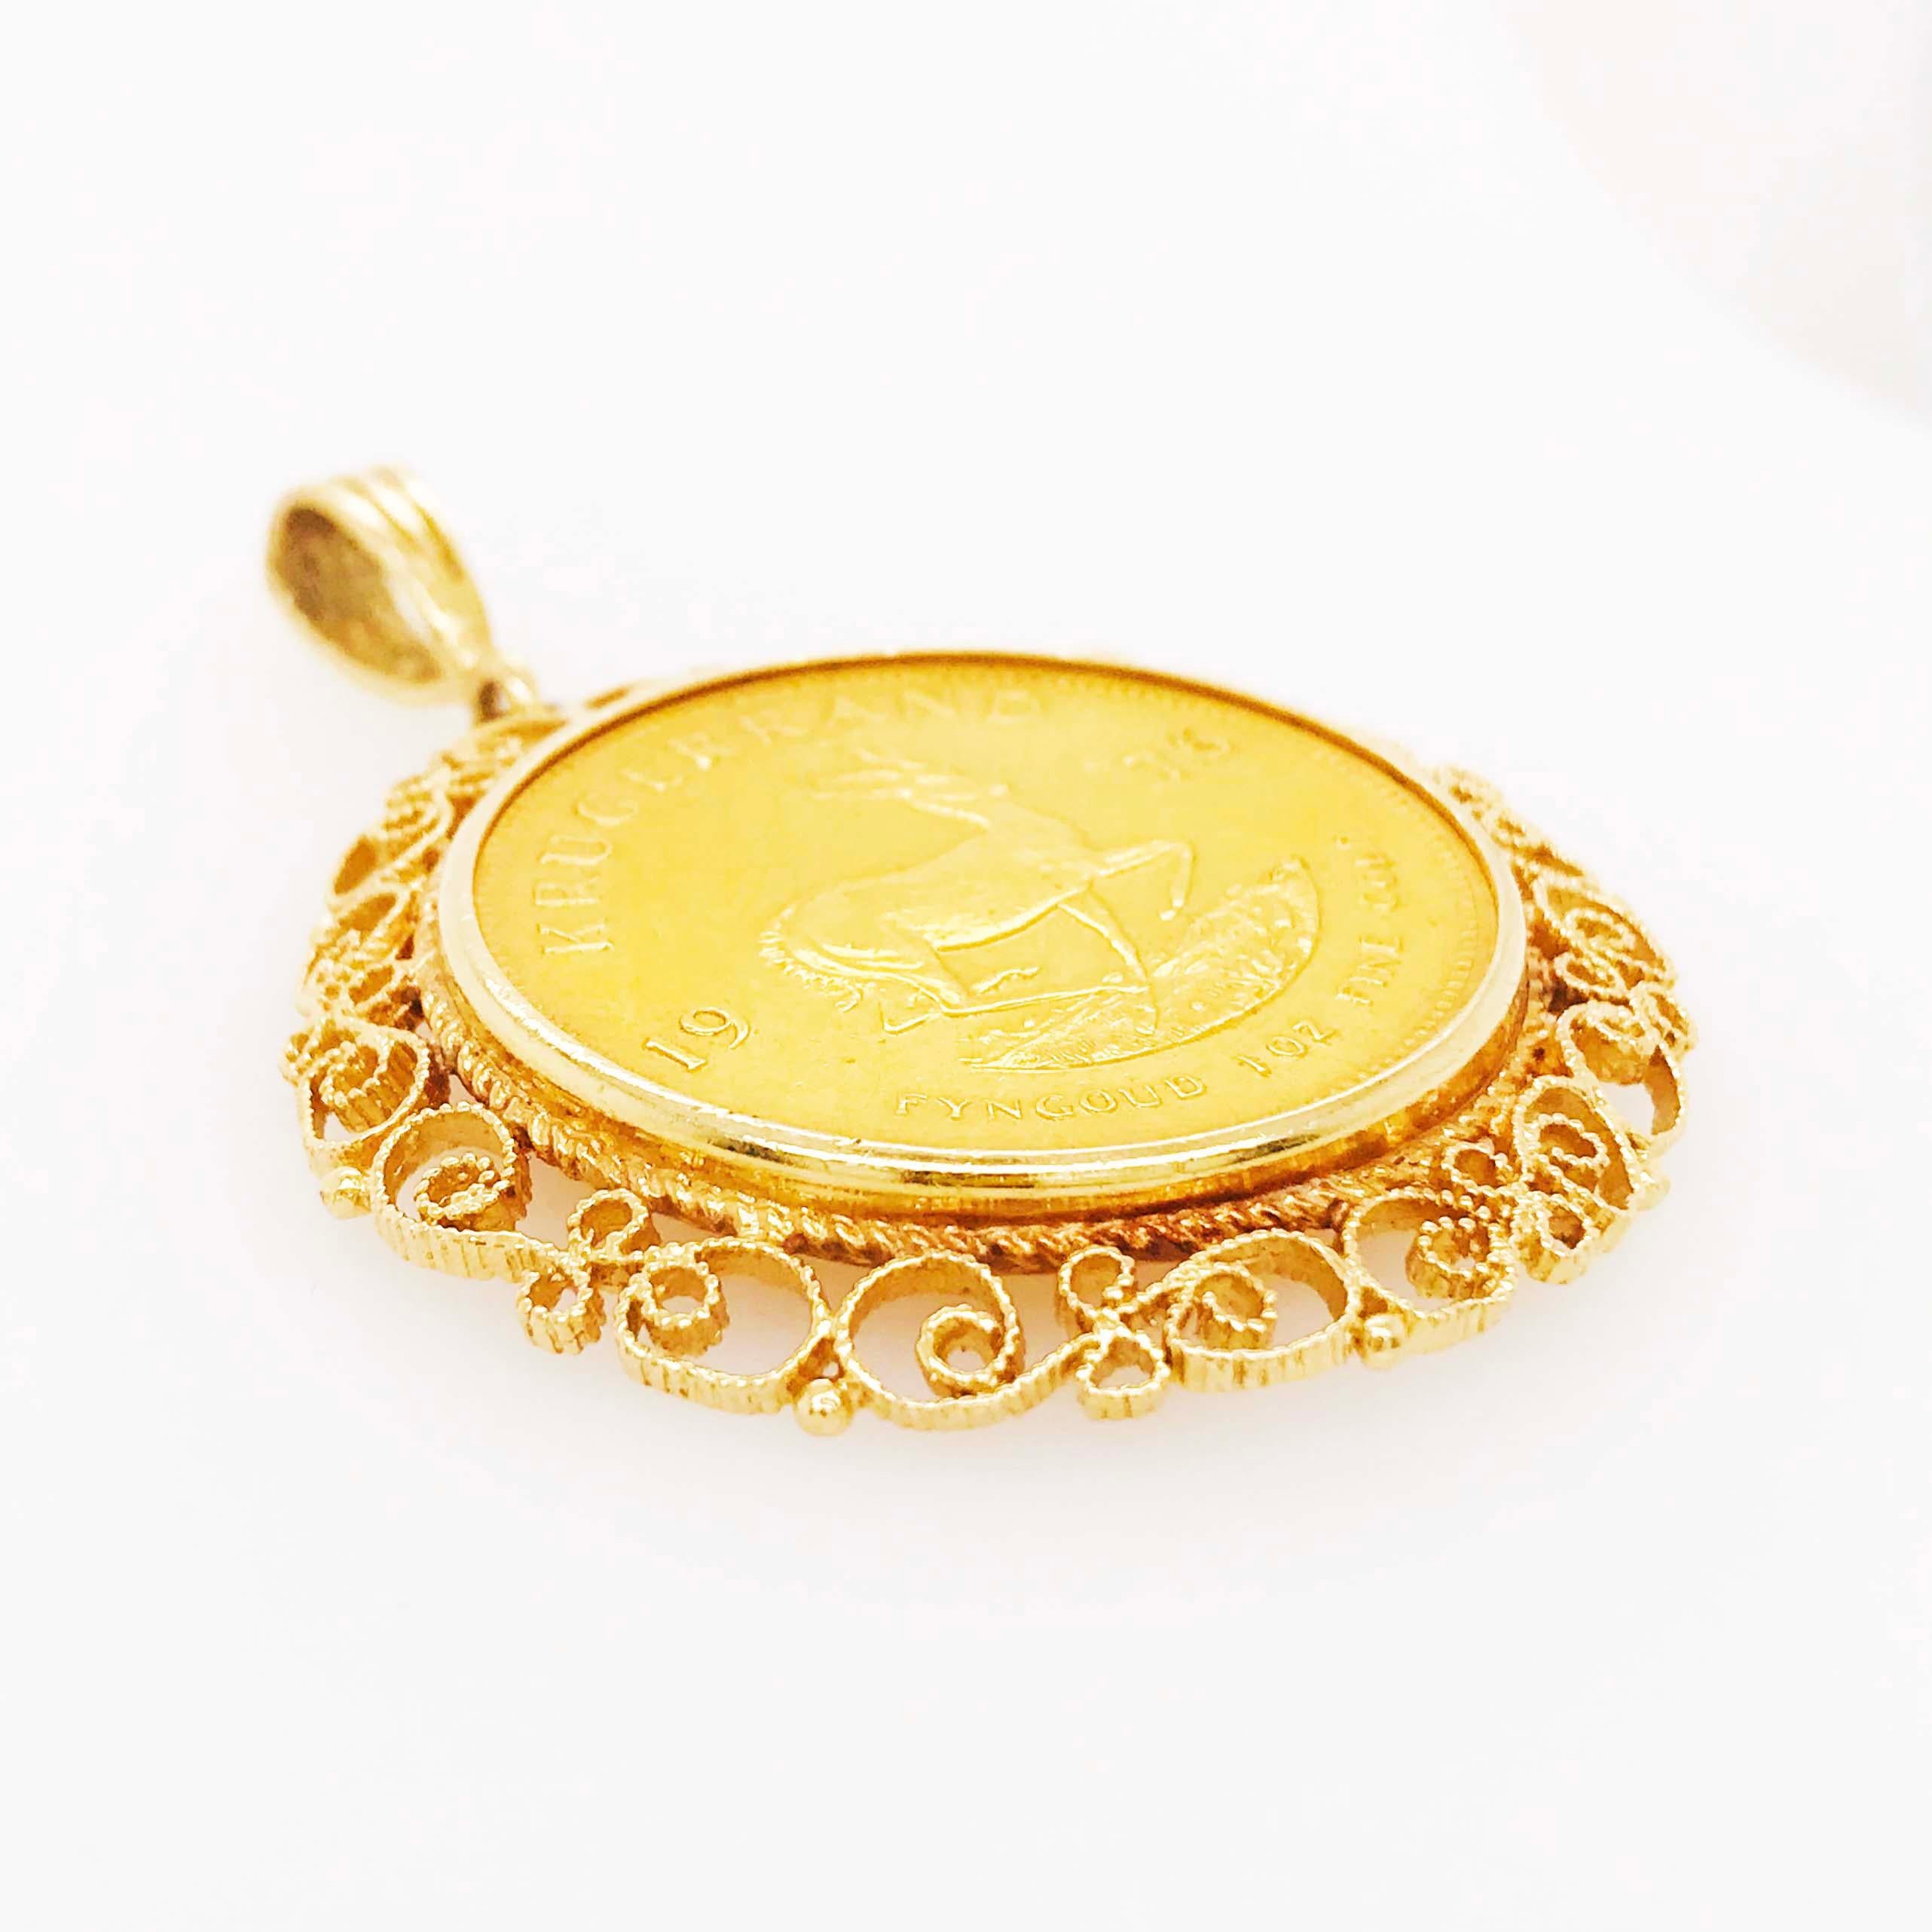 22K Gold Coins are all the rage and this one will definitely get your friends talking! This is a genuine 1 oz 1976 Krugerrand South Africa gold coin! Set in a one- of- a-kind custom gold bezel! This is a rich and special jewelry piece. This gold